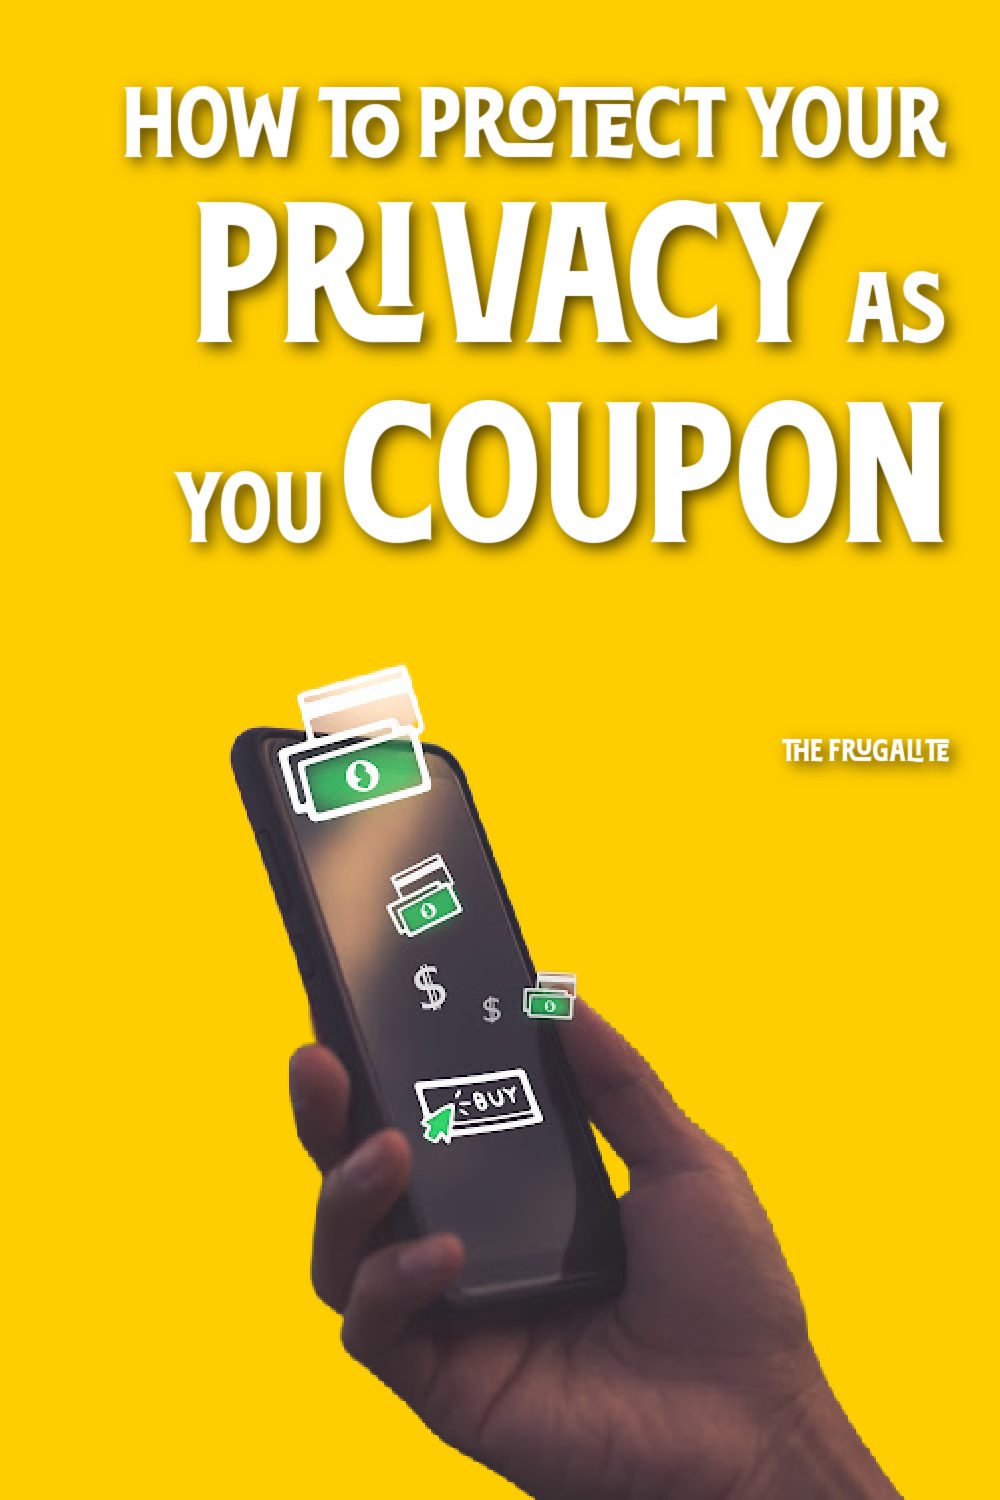 How to Protect Your Privacy as You Coupon